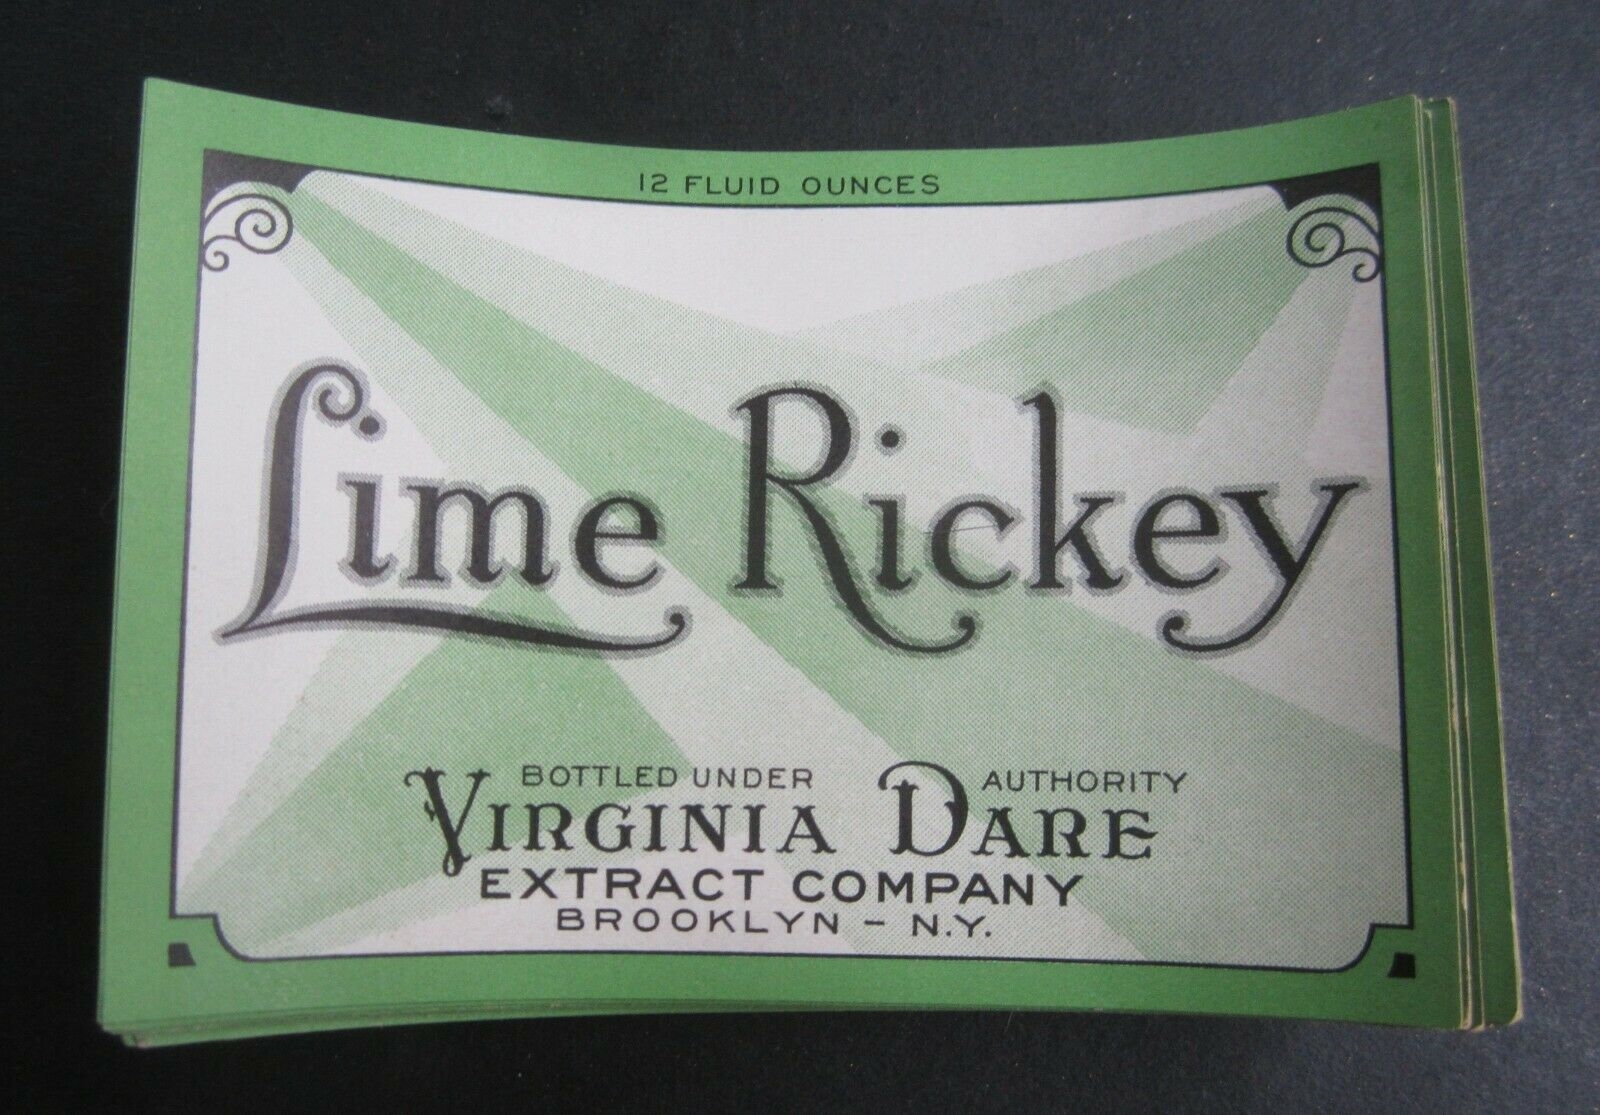  Lot of 50 Old Vintage - LIME RICKEY SODA - LAB...